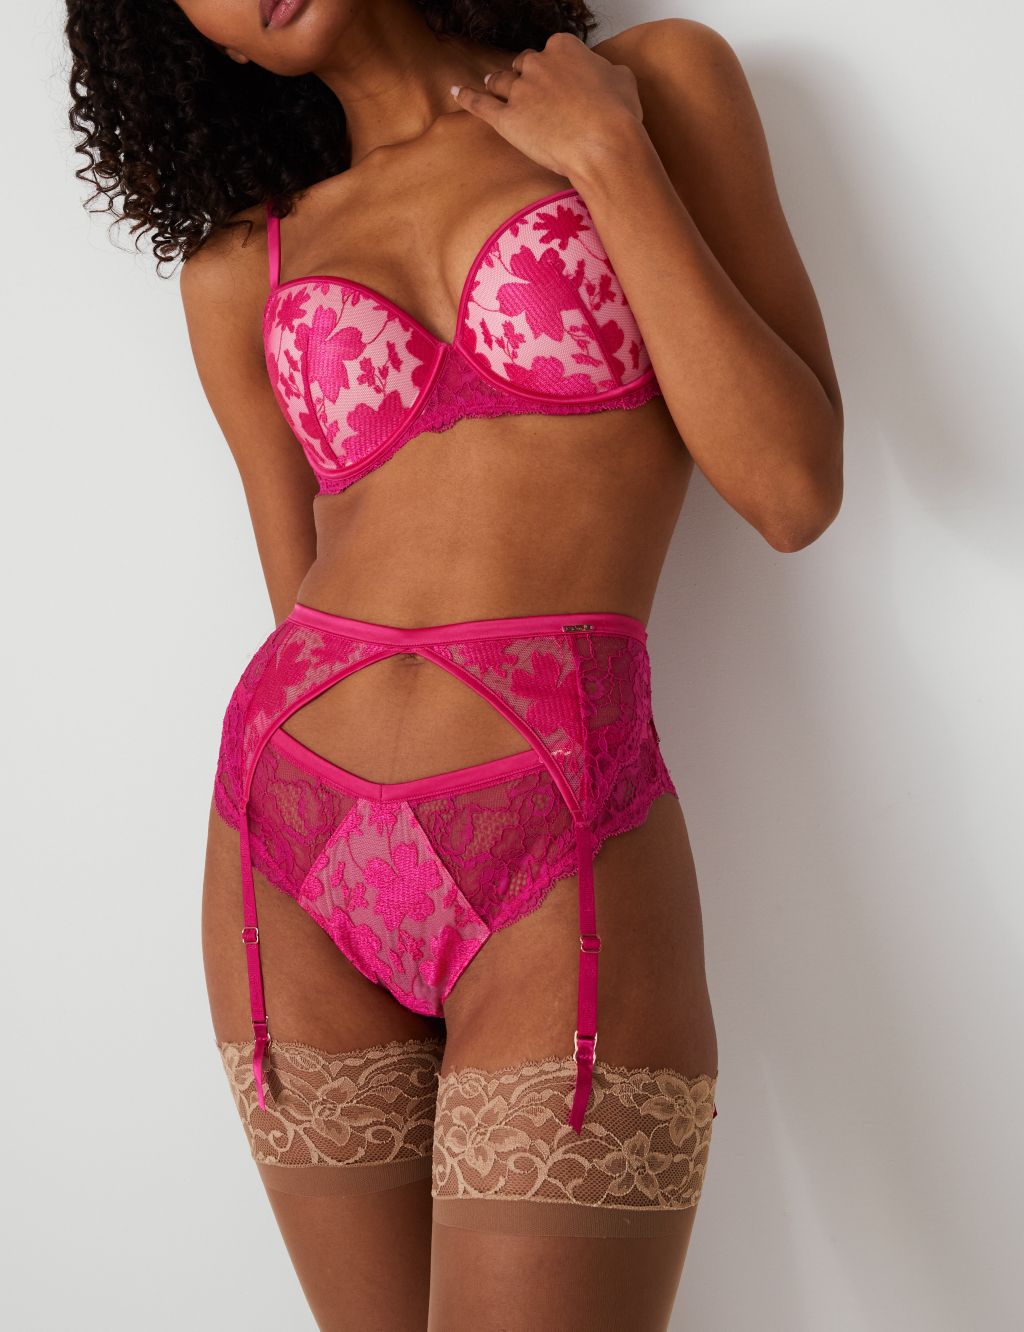 Rosie Exclusively for M&S Pink Lingerie